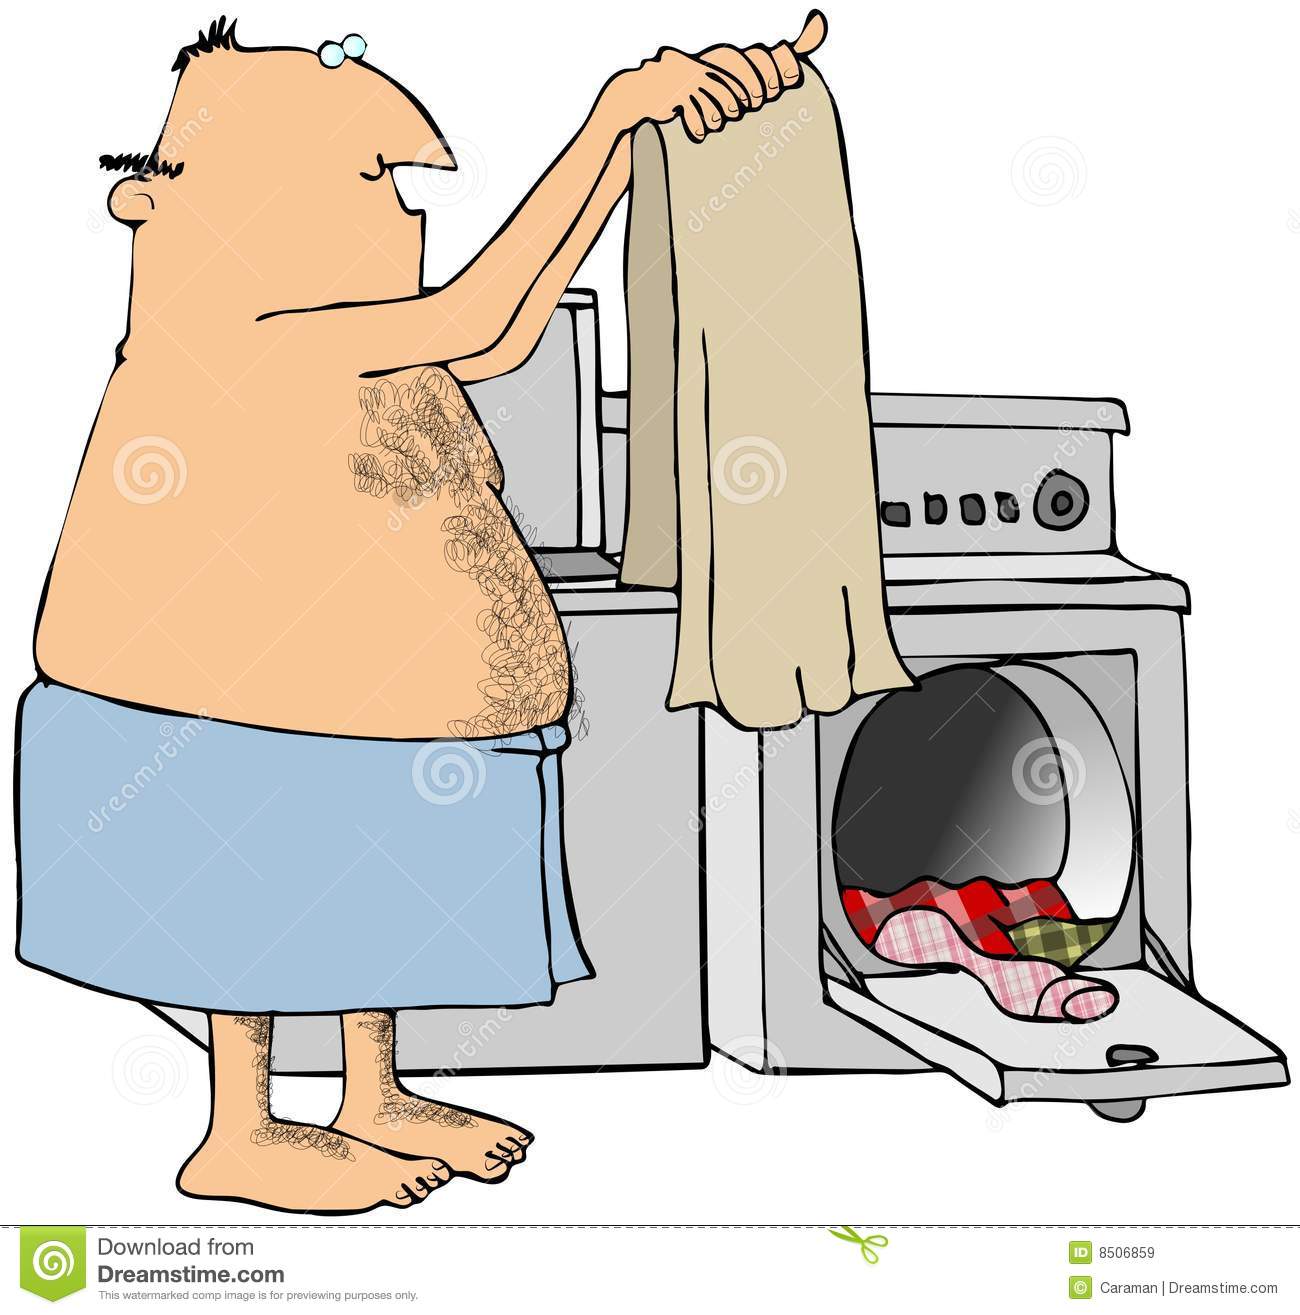 Illustration Depicts A Man Getting Laundry Out Of A Clothes Dryer